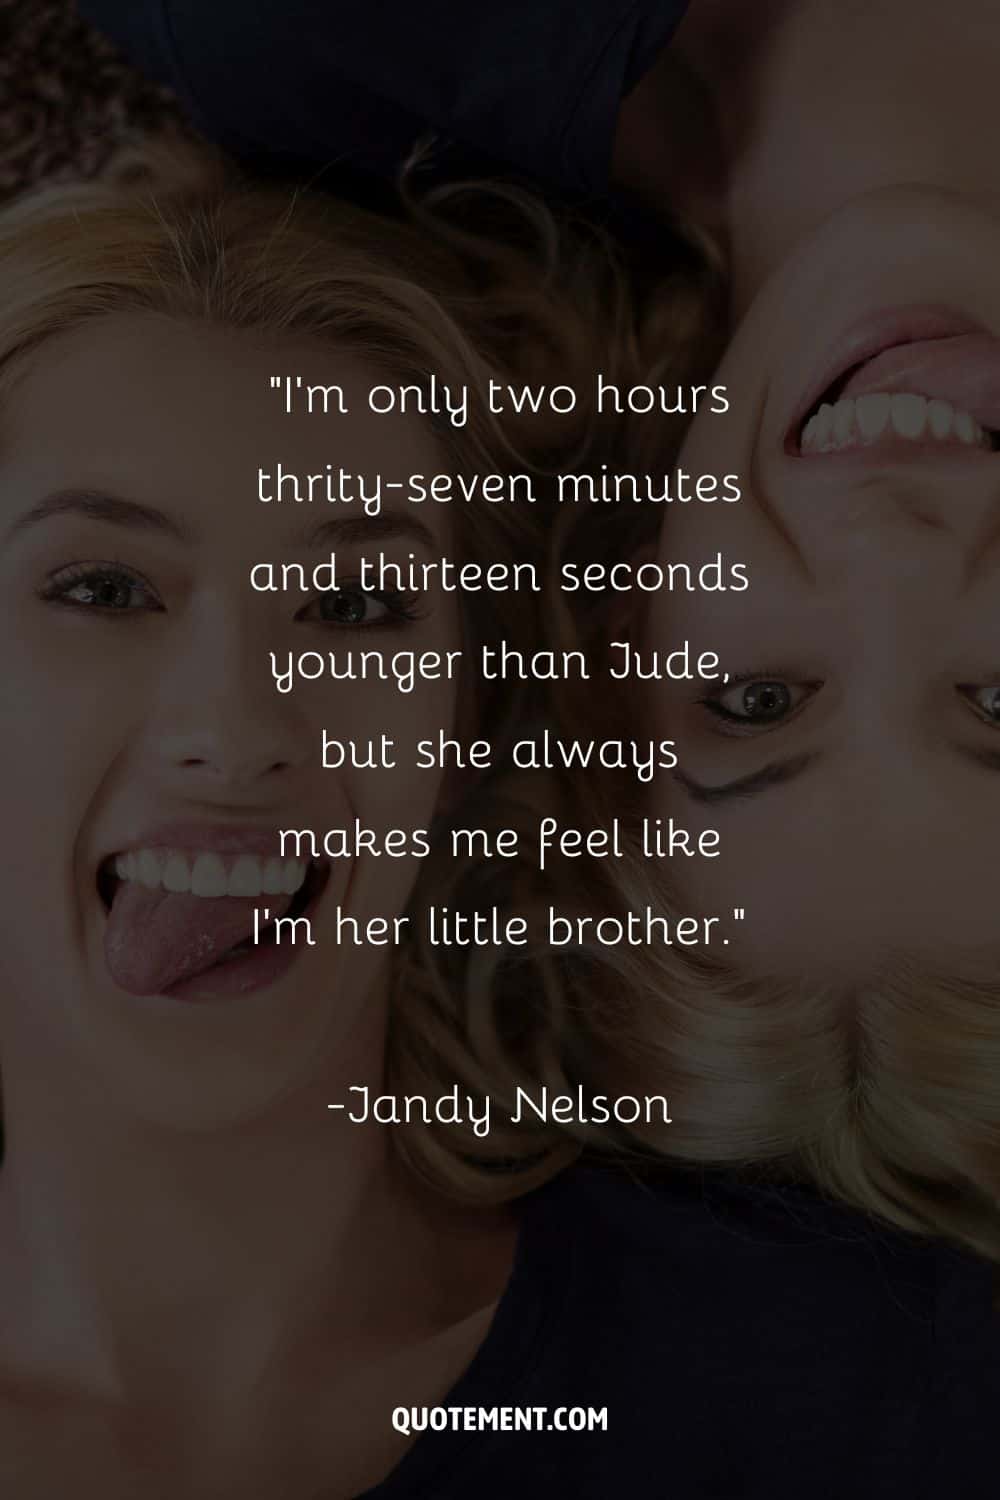 “I'm only two hours thrity-seven minutes and thirteen seconds younger than Jude, but she always makes me feel like I'm her little brother.